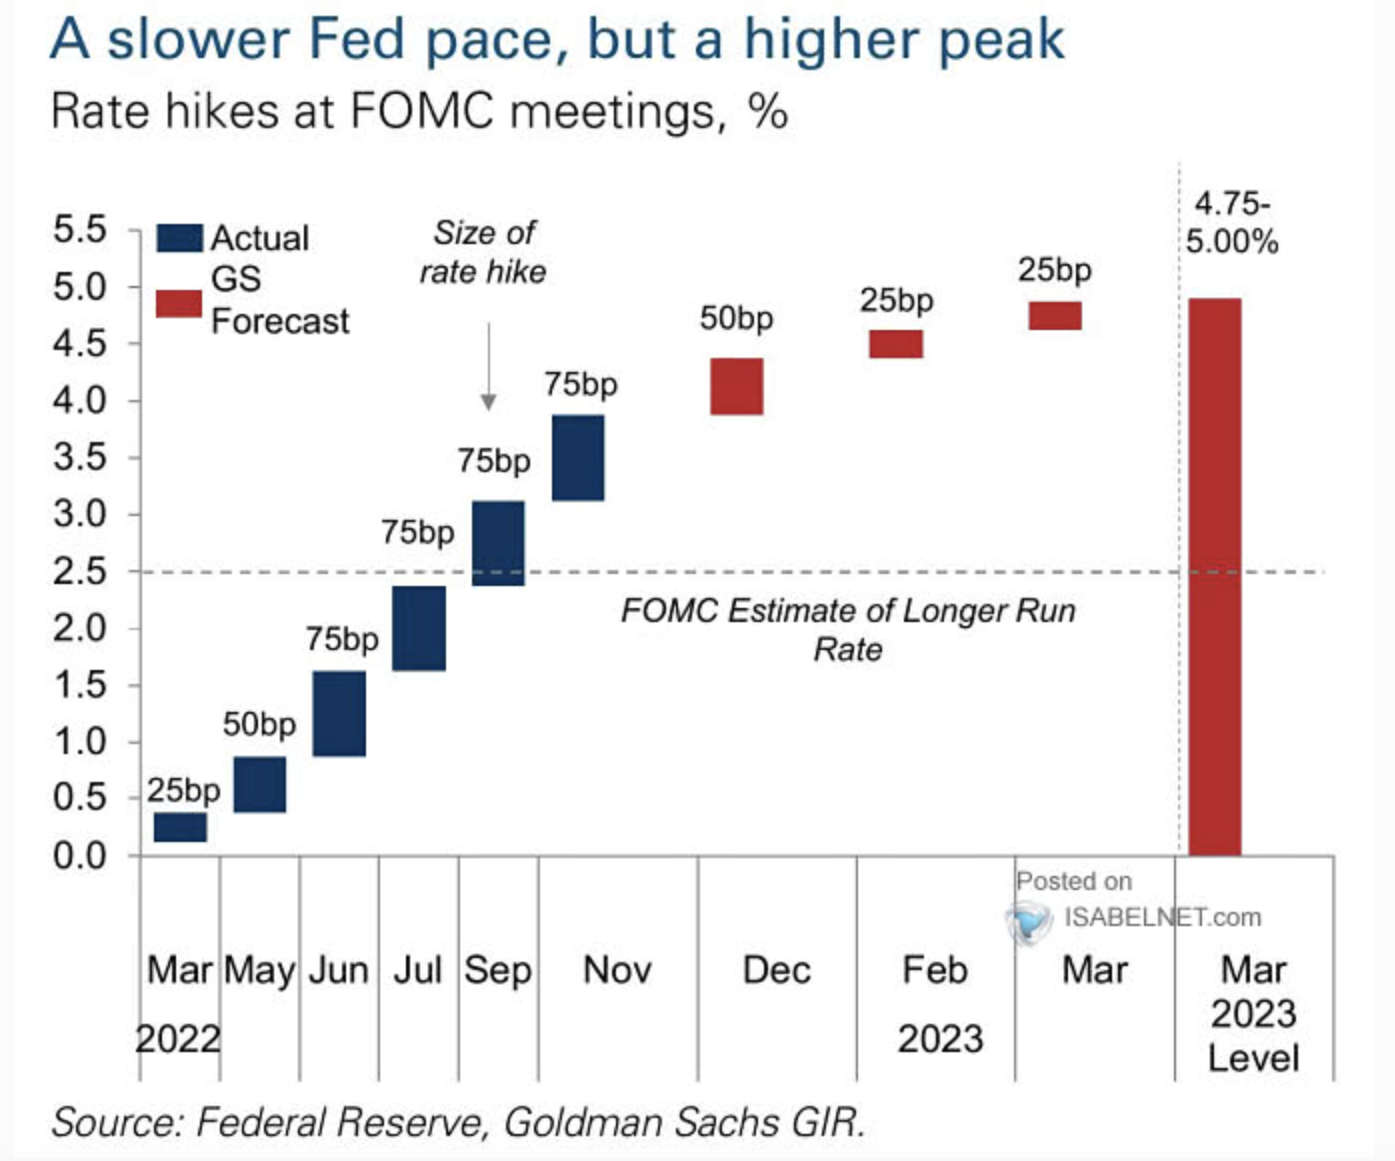 Goldman Sachs's Rate Hike Expectations